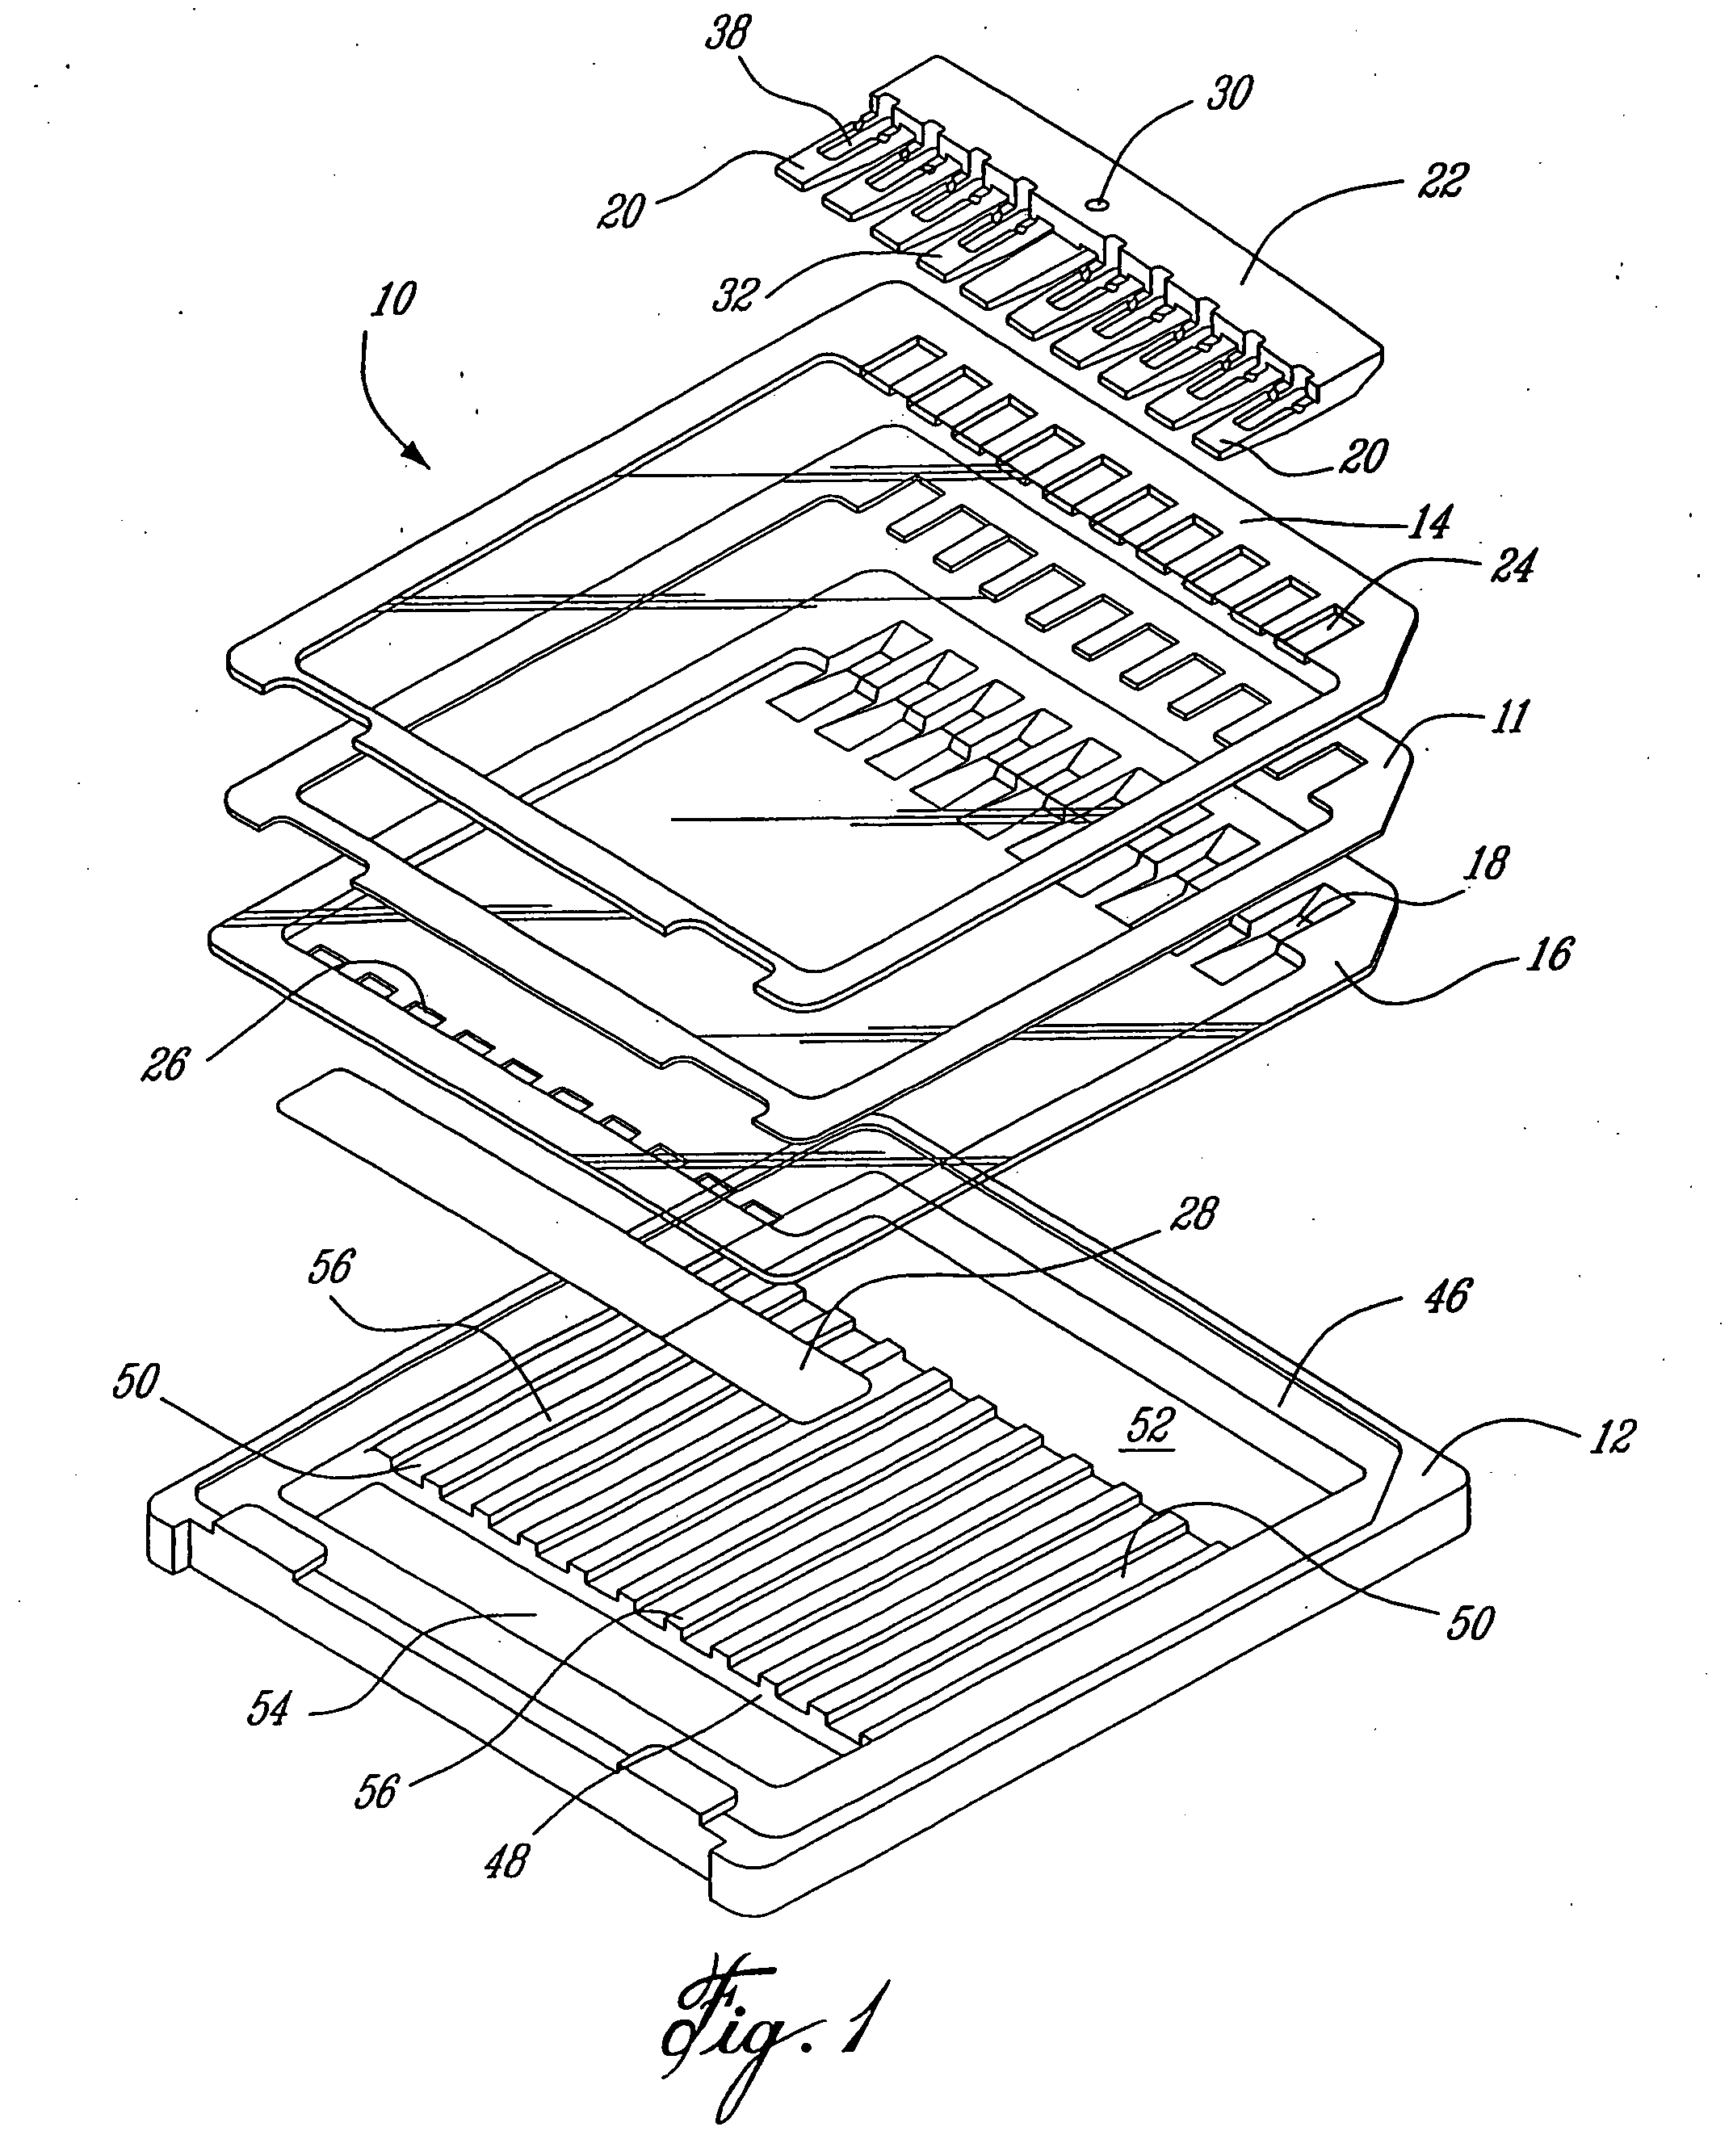 Apparatus for the manufacture of a disposable electrophoresis cassette and method thereof